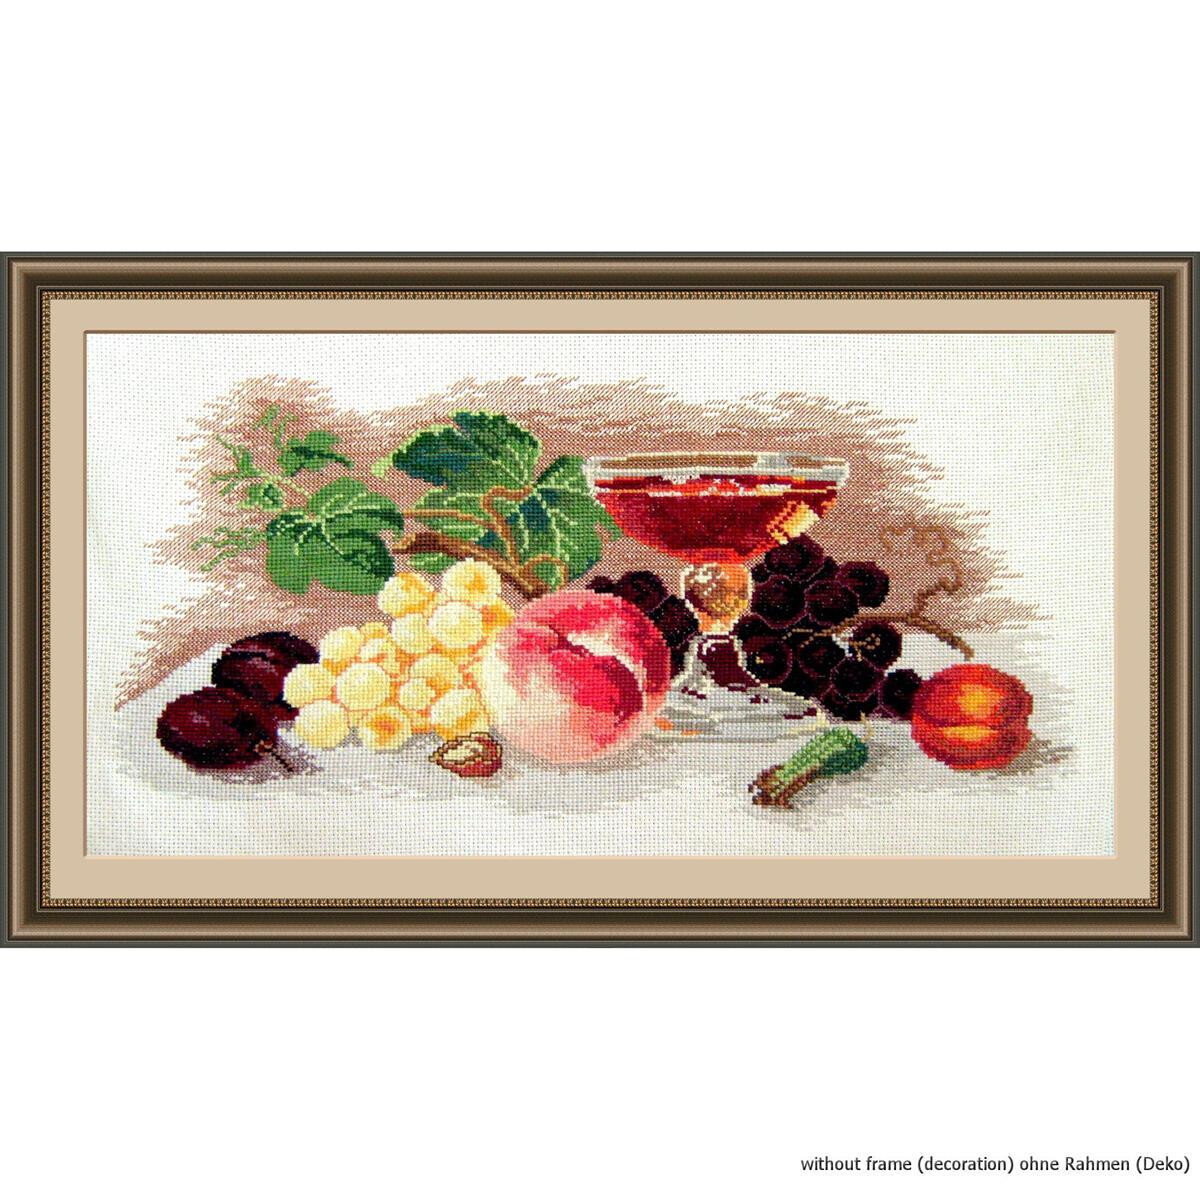 Oven counted cross stitch kit "Still life with...